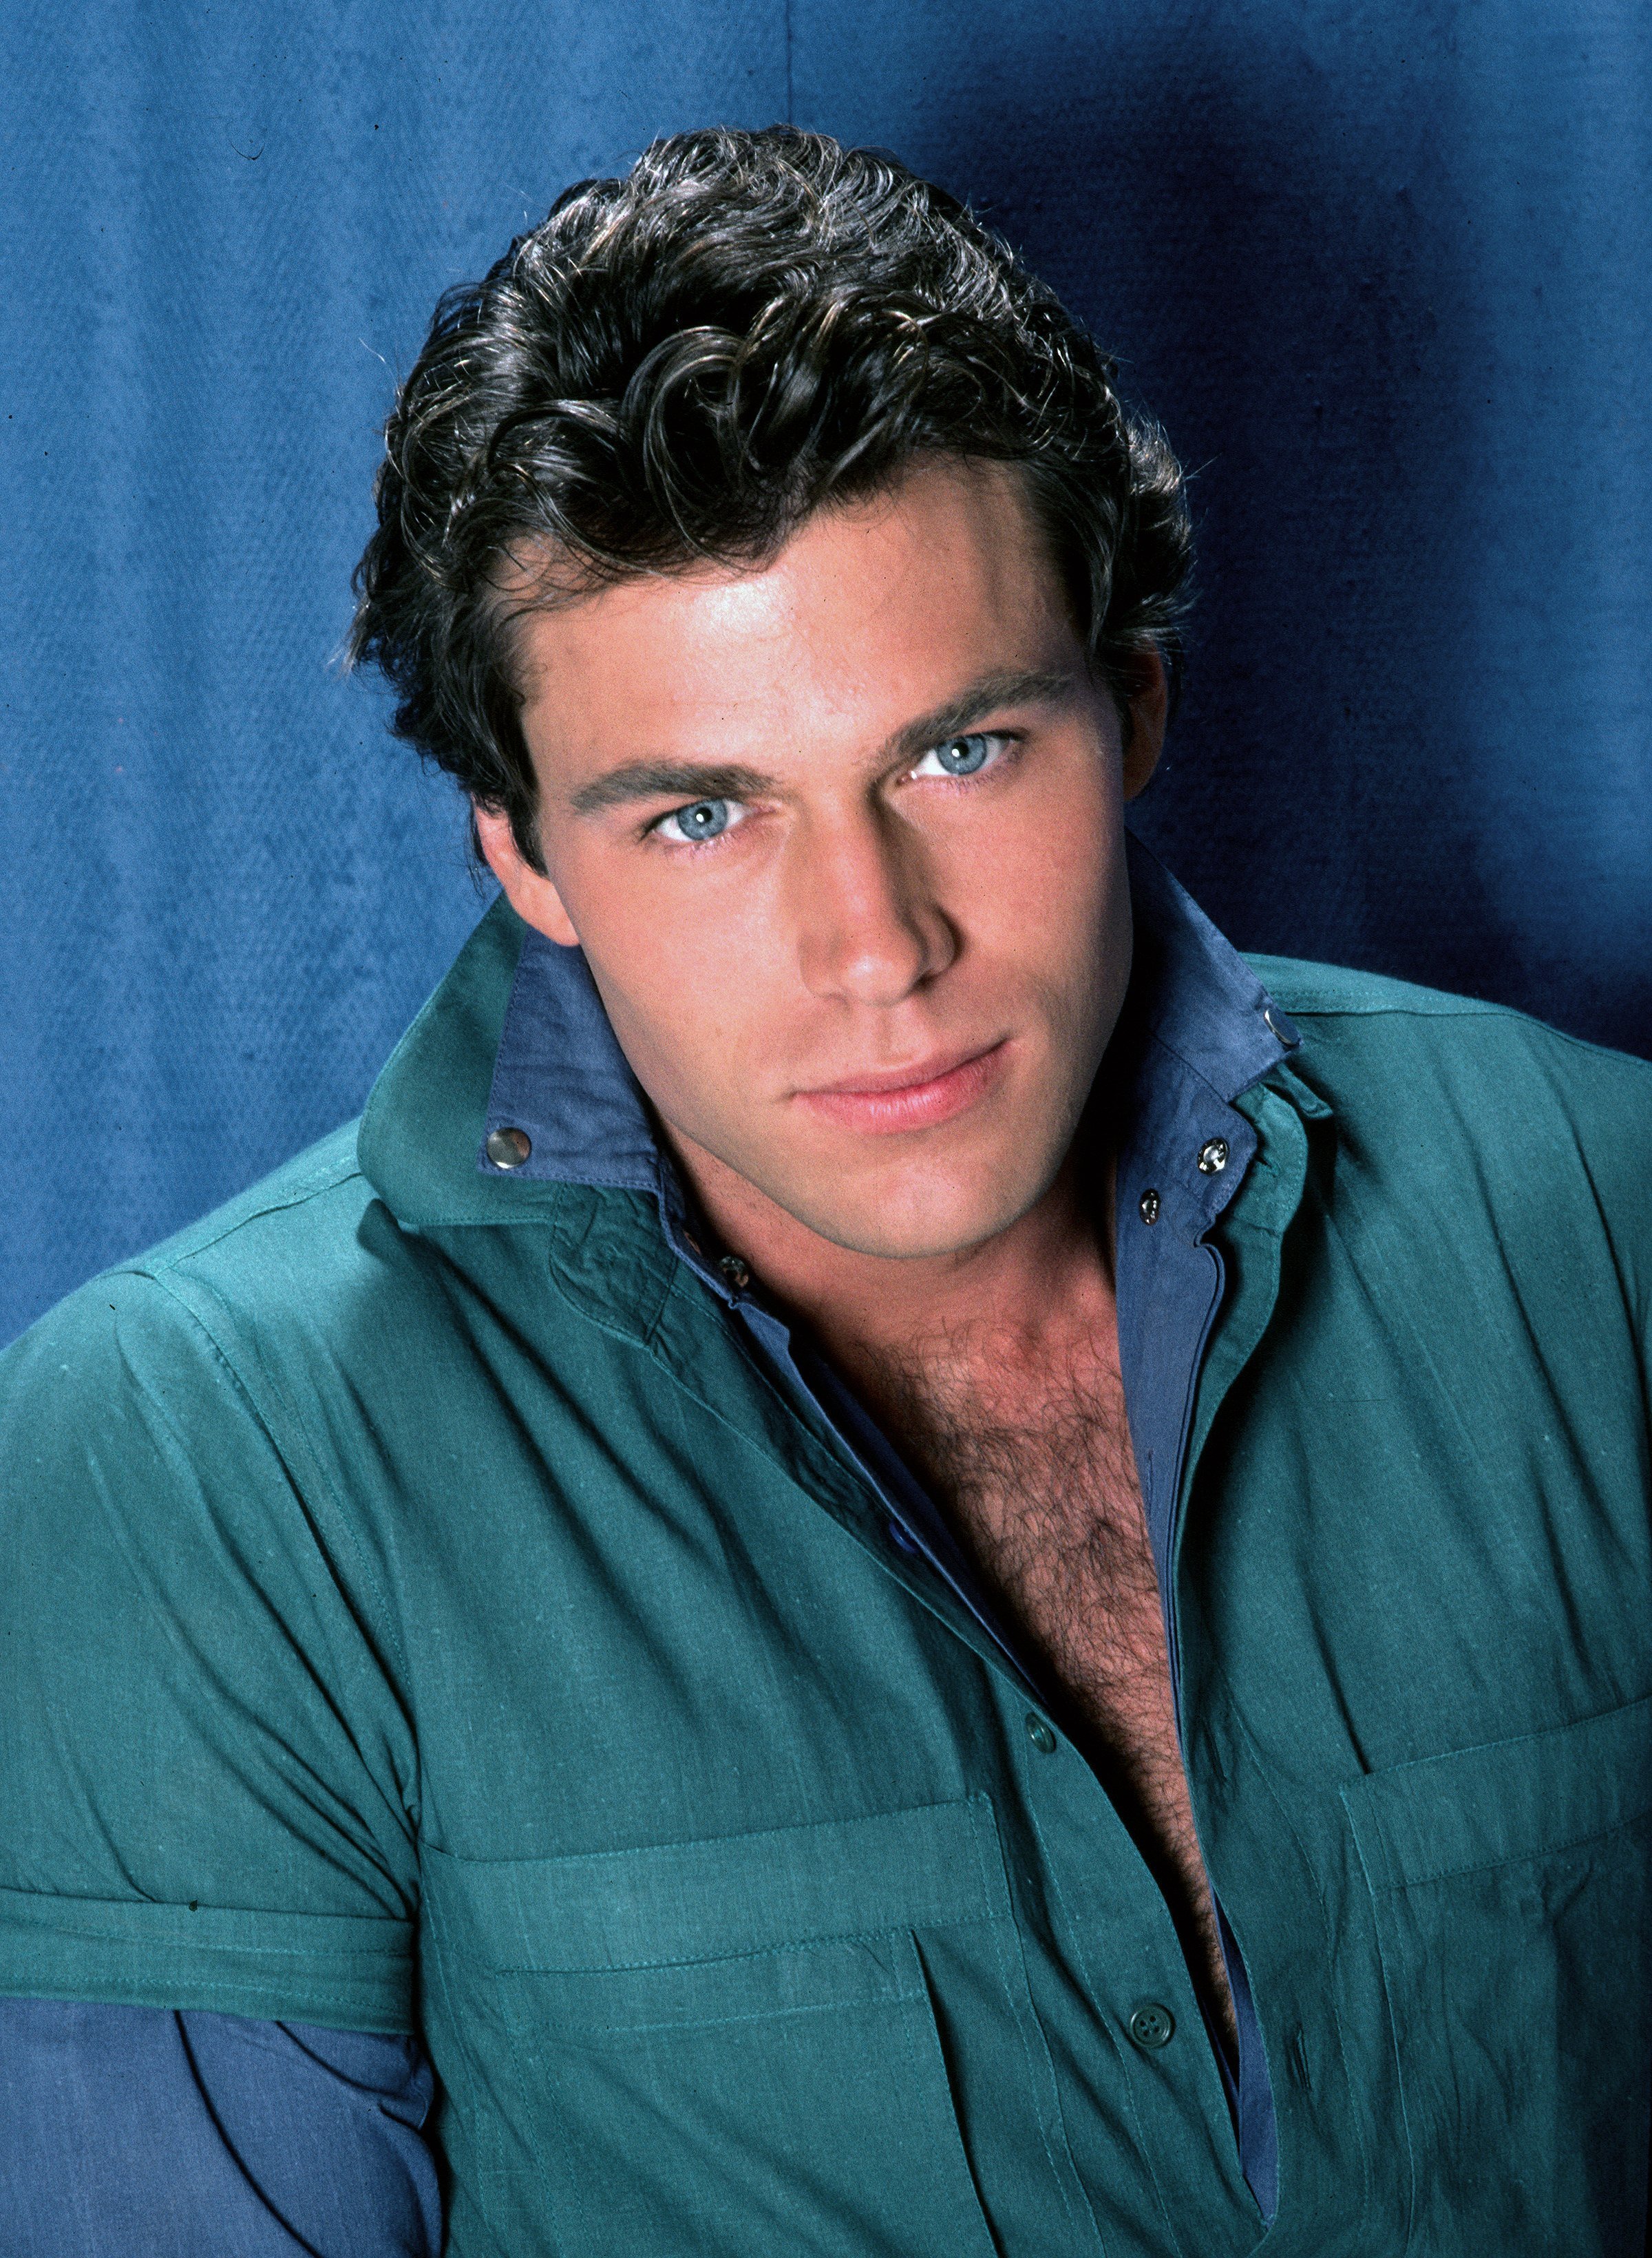 Jon-Erik Hexum poses for a portrait in 1984. | Source: Getty Images